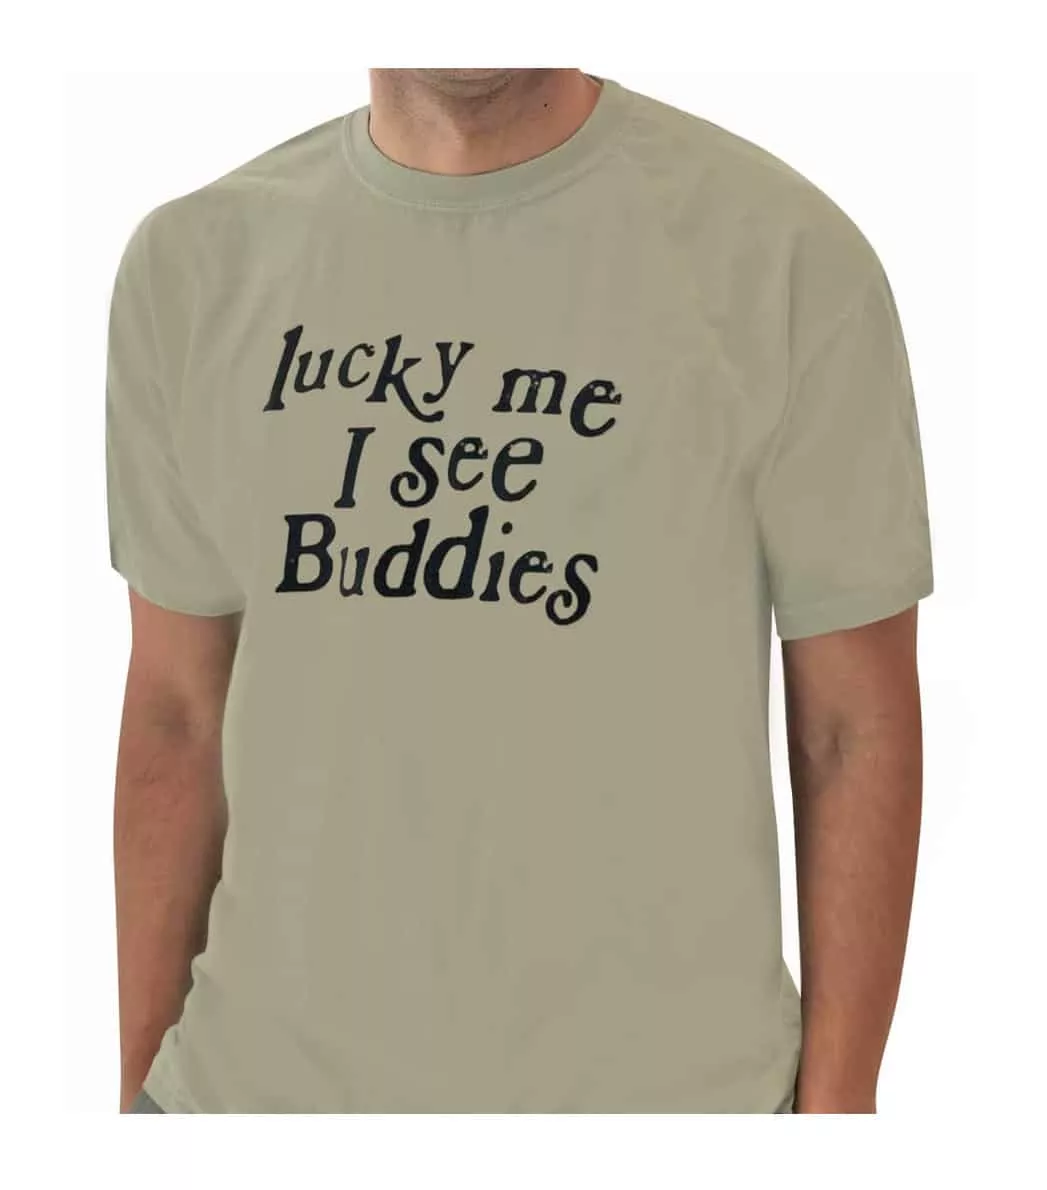 Luck Me I See Buddies (Front)